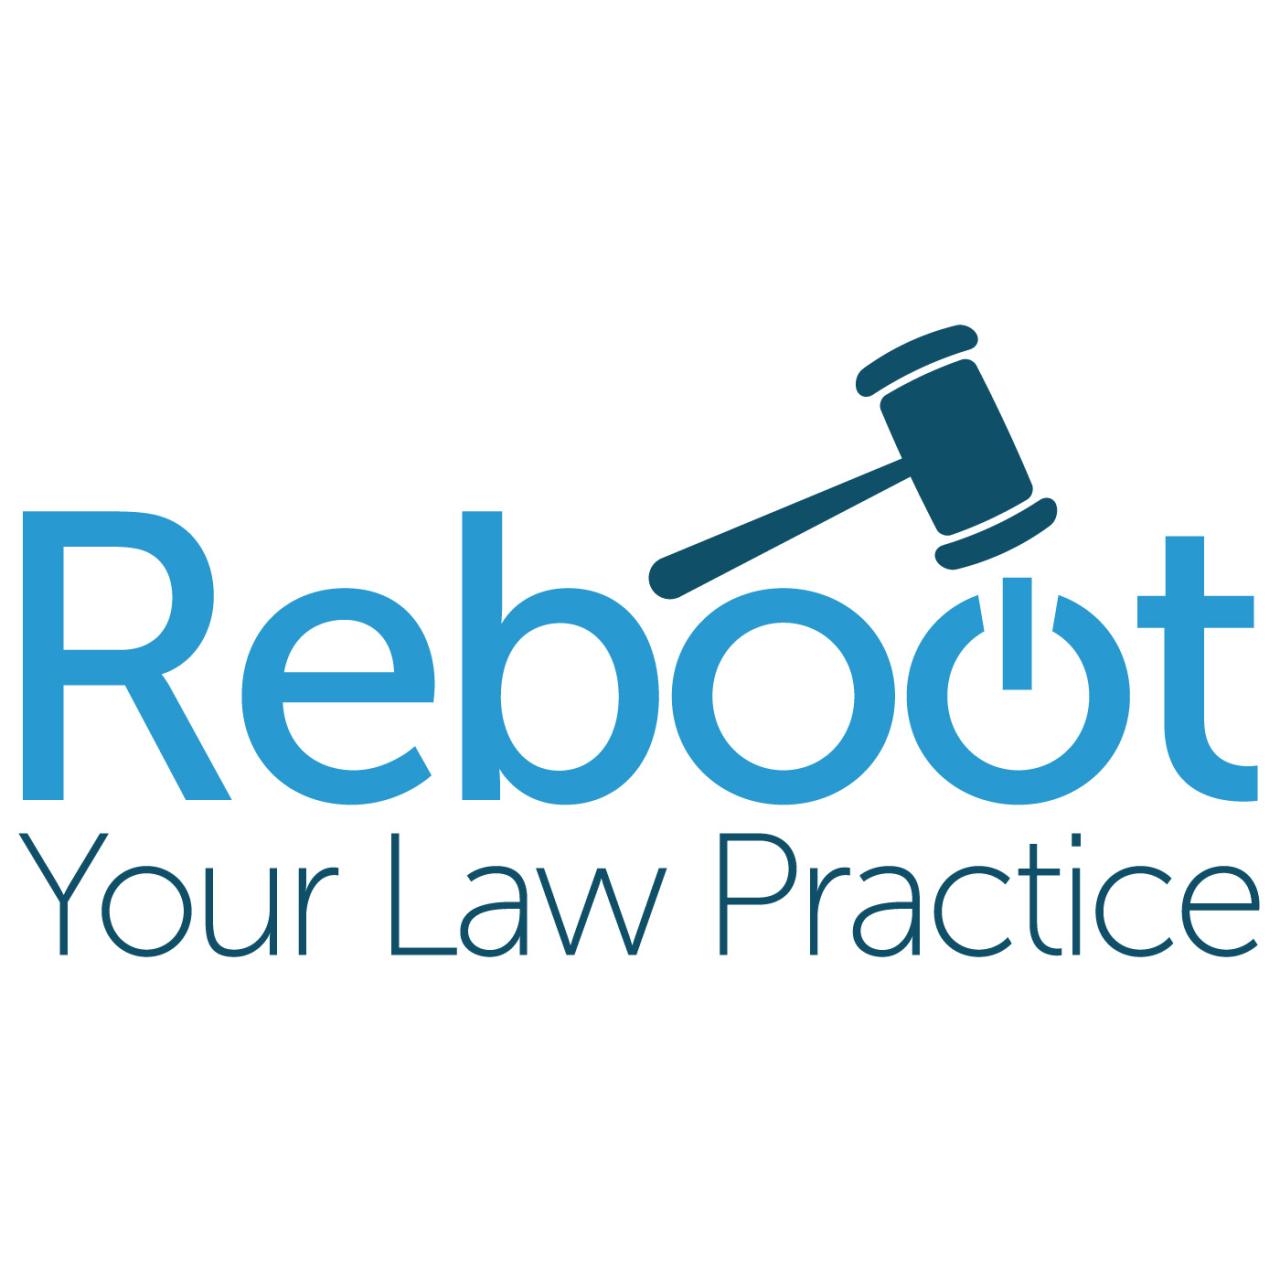 Reboot your law practice podcast 3 the need to be authentic